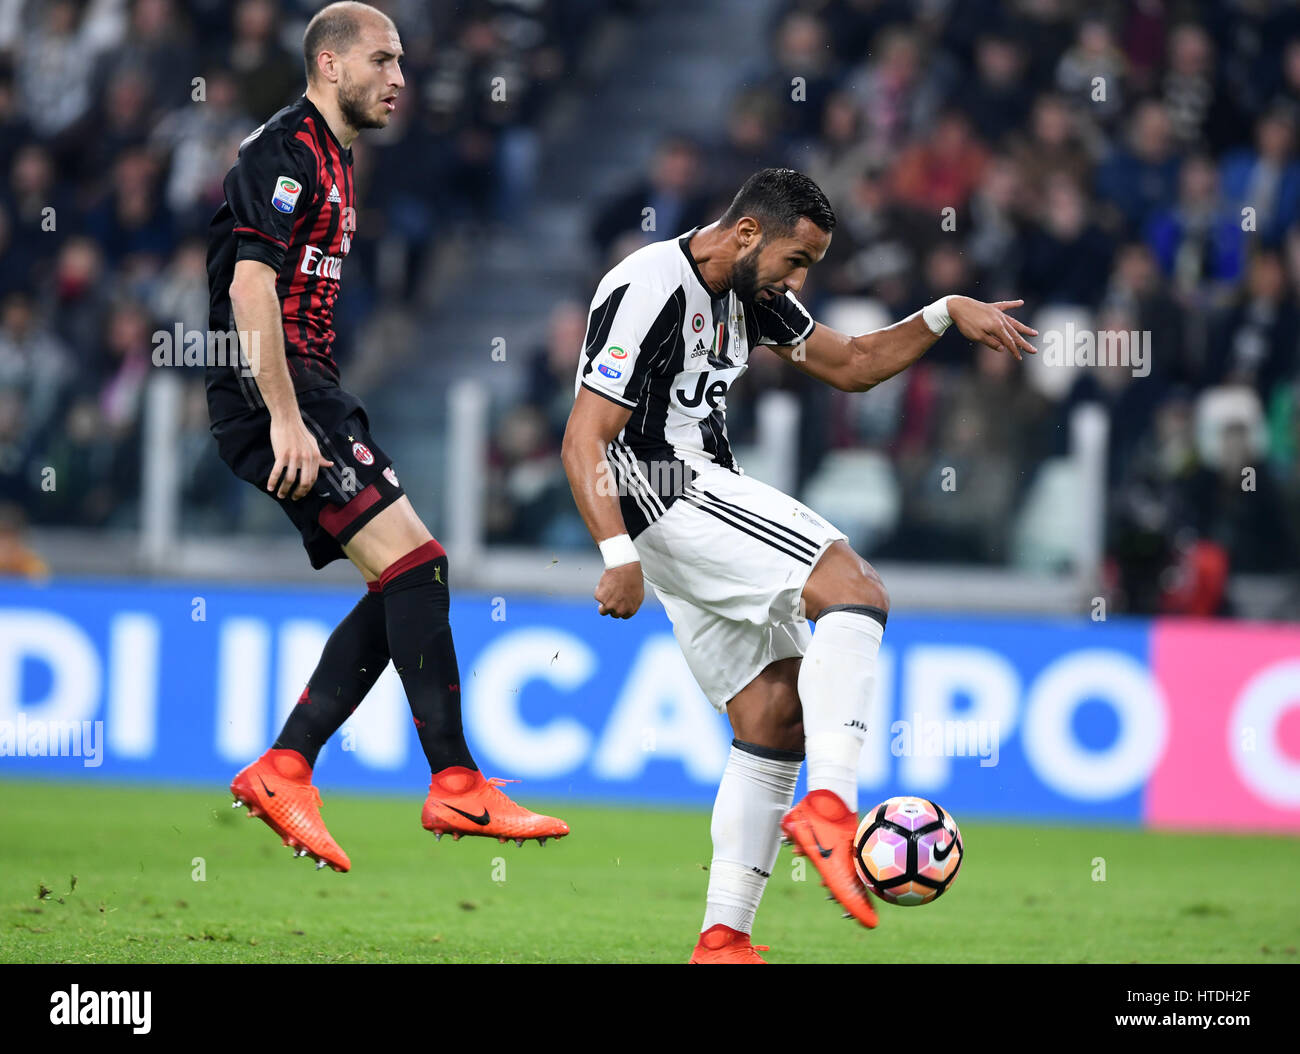 Turin, Italy. 10th Mar, 2017. Medhi Benatia (R) of Juventus scores during the Italian Serie A soccer match between Juventus and AC Milan, in Turin, Italy, March 10, 2017. Juventus won 2-1. Credit: Alberto Lingria/Xinhua/Alamy Live News Stock Photo